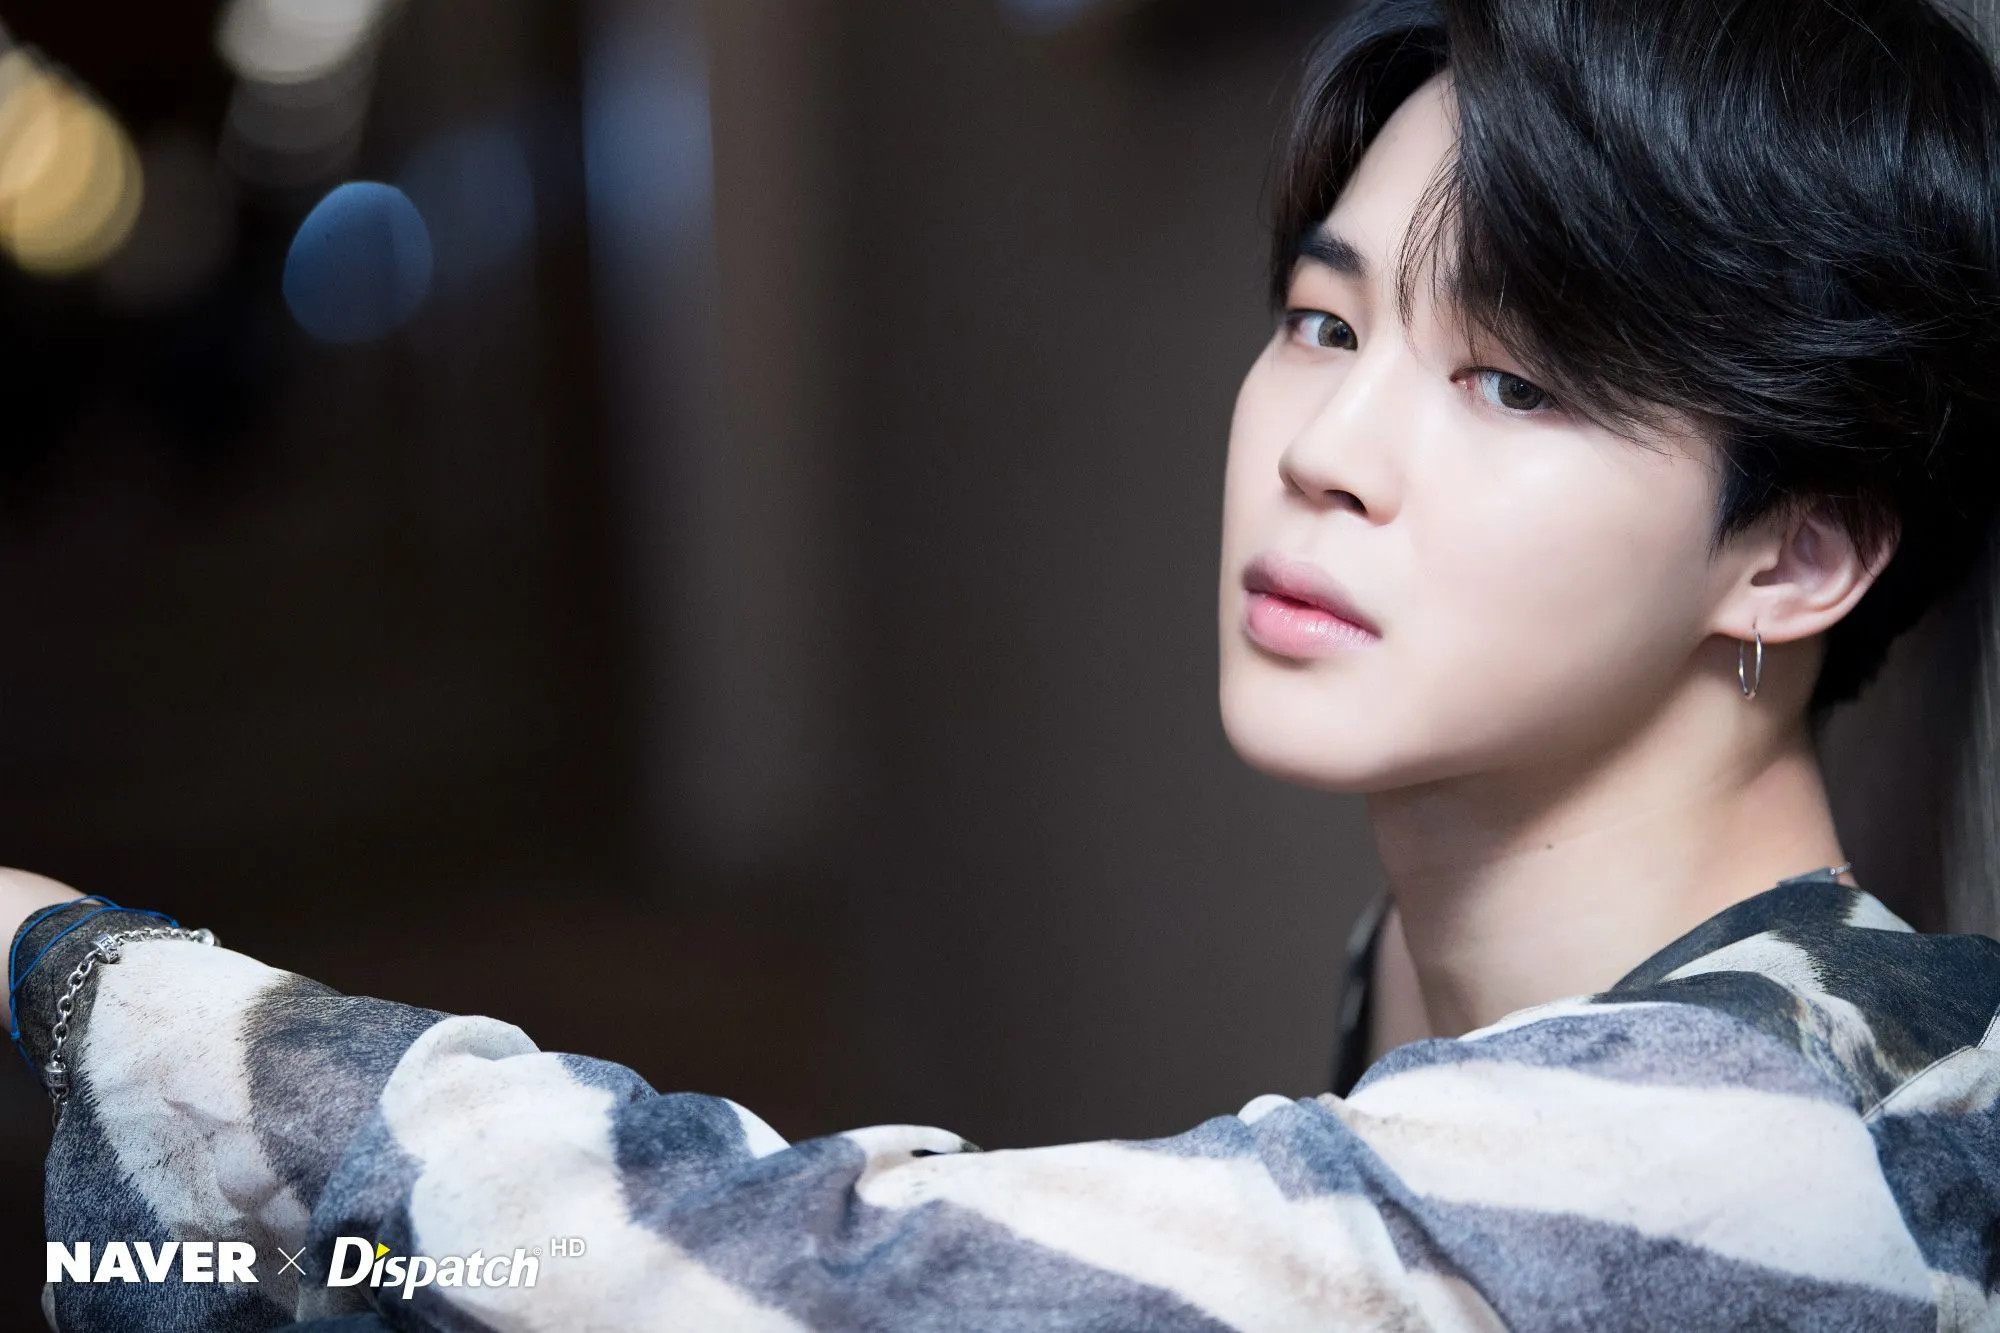 BTS Billboard Music Awards photoshoot by Naver x Dispatch | kpopping